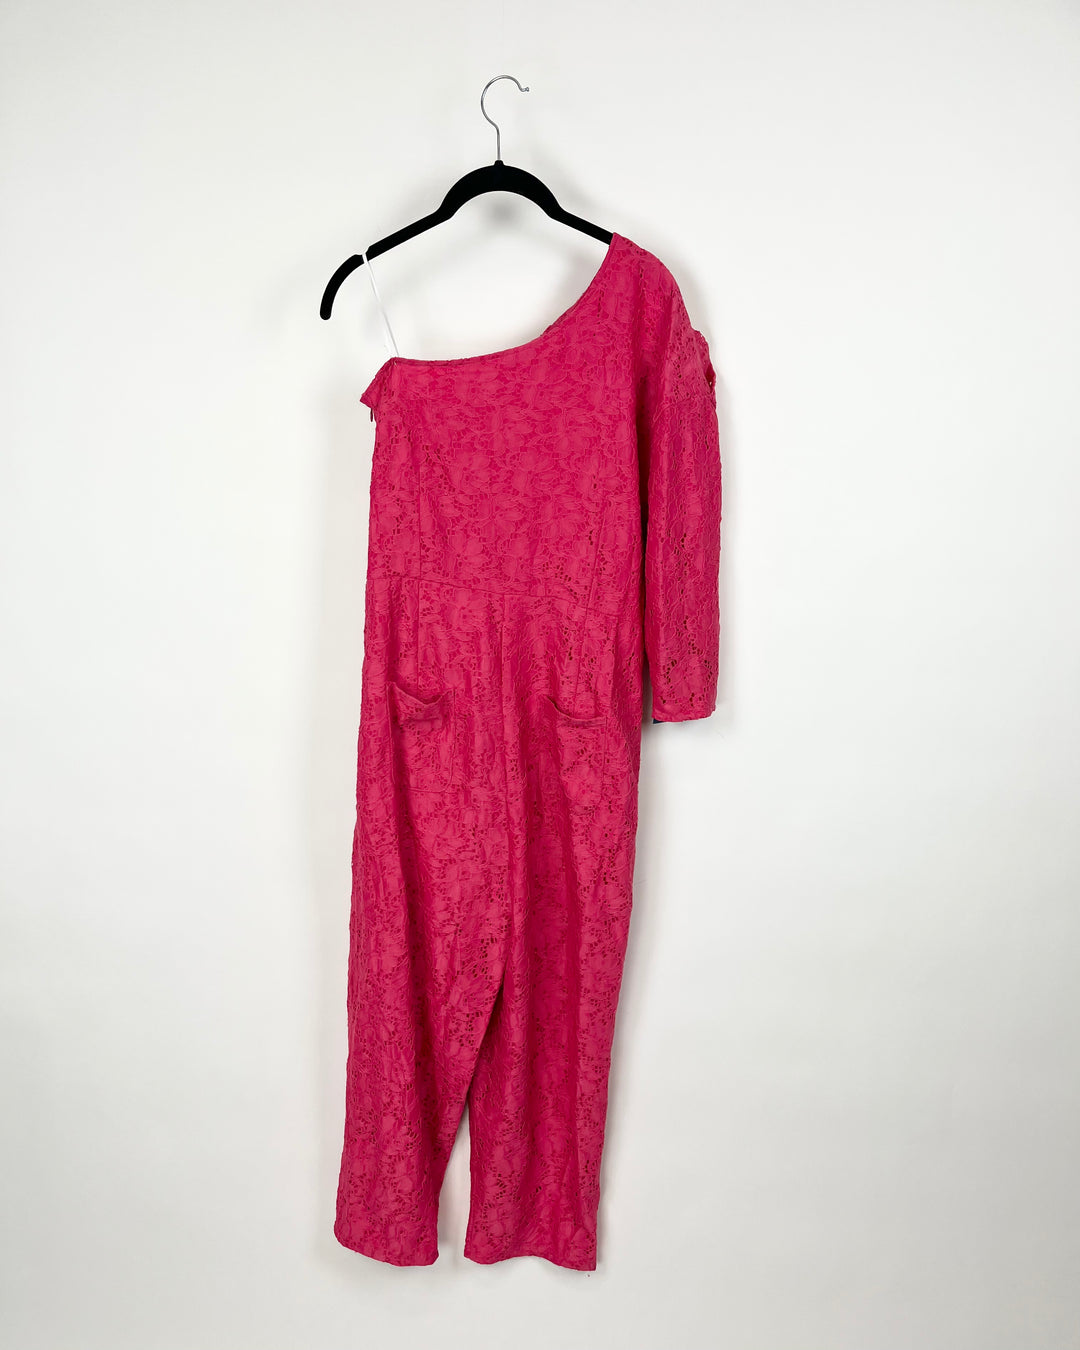 Hot Pink Lace One Sleeve Jumpsuit - Small/Medium